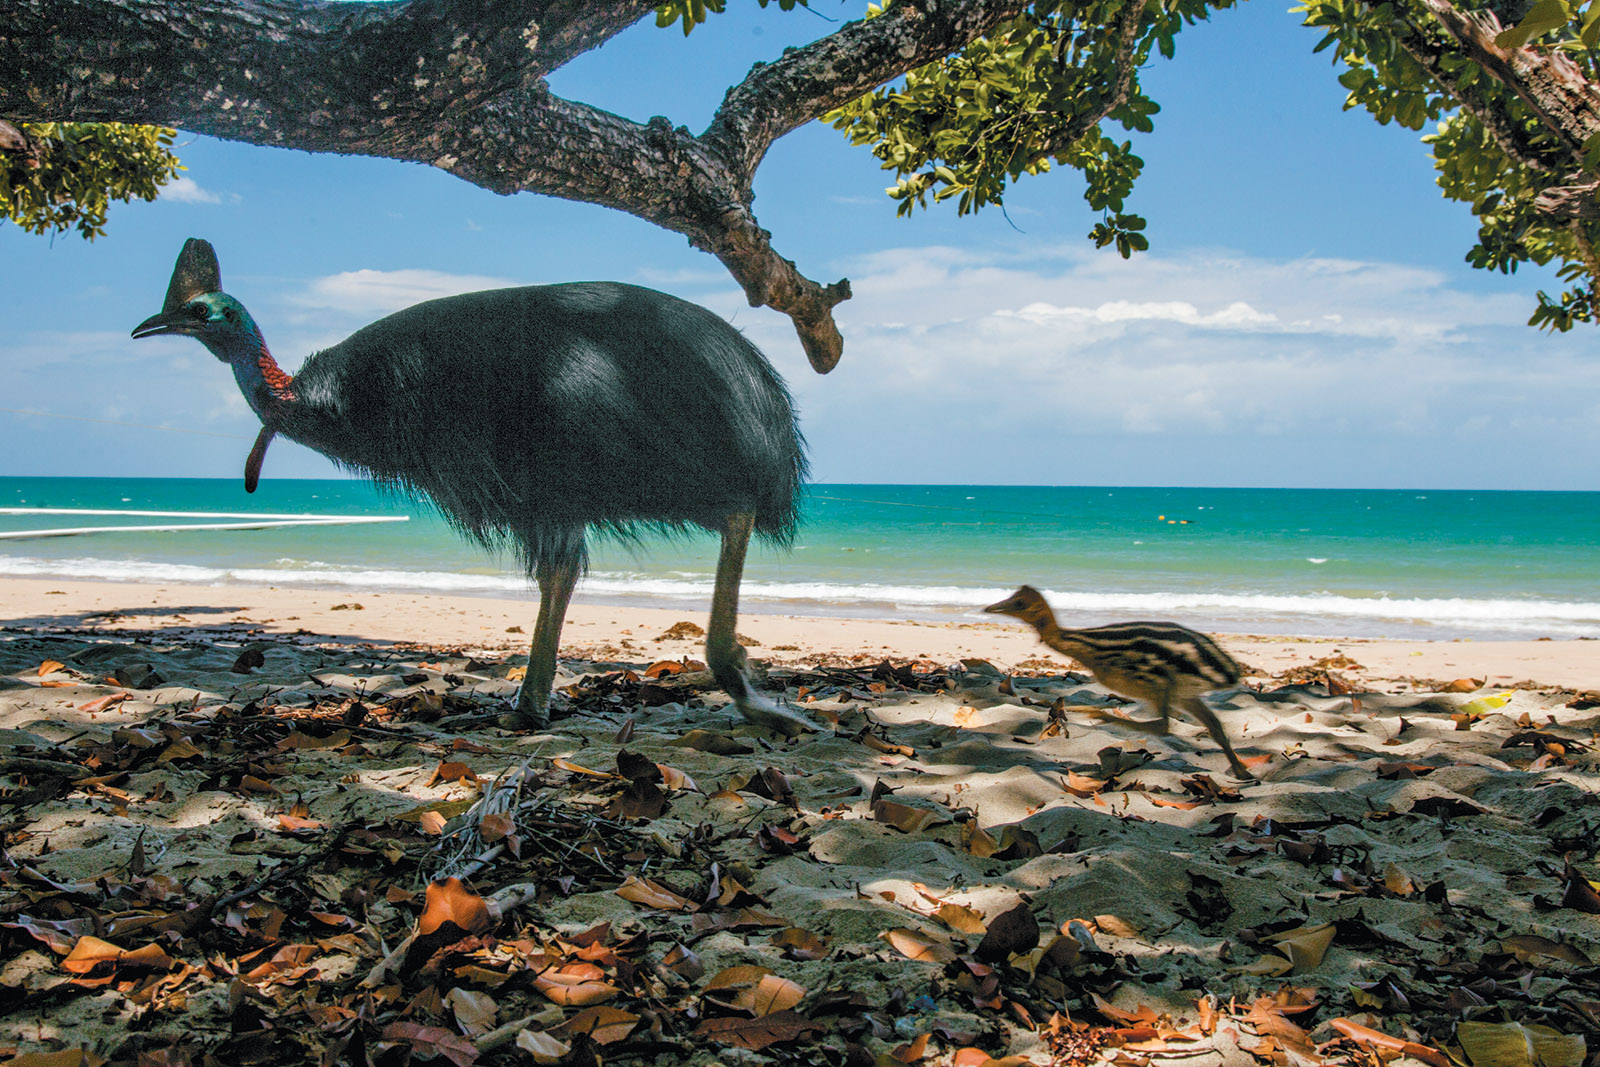 A cassowary chick following its father along a beach in Etty Bay, Queensland, Australia